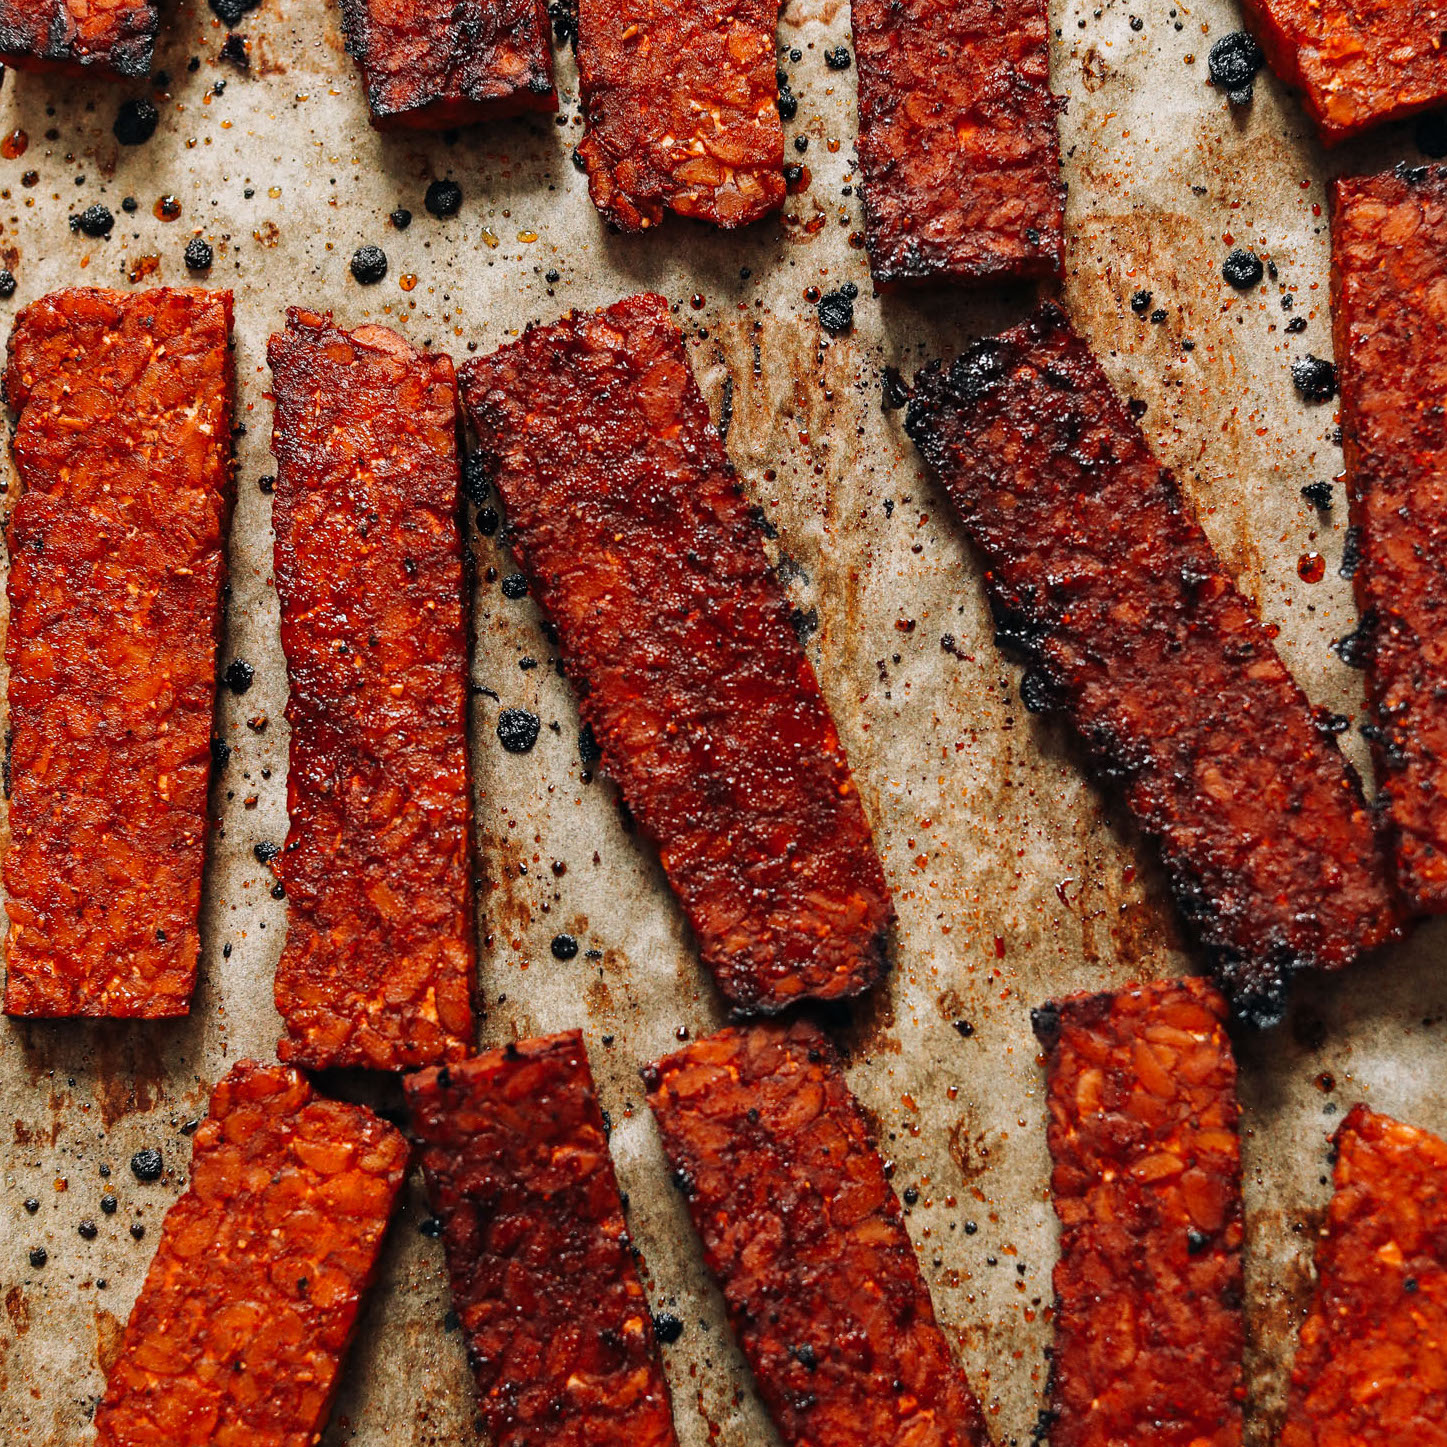 What Is Tempeh And What Does It Taste Like?